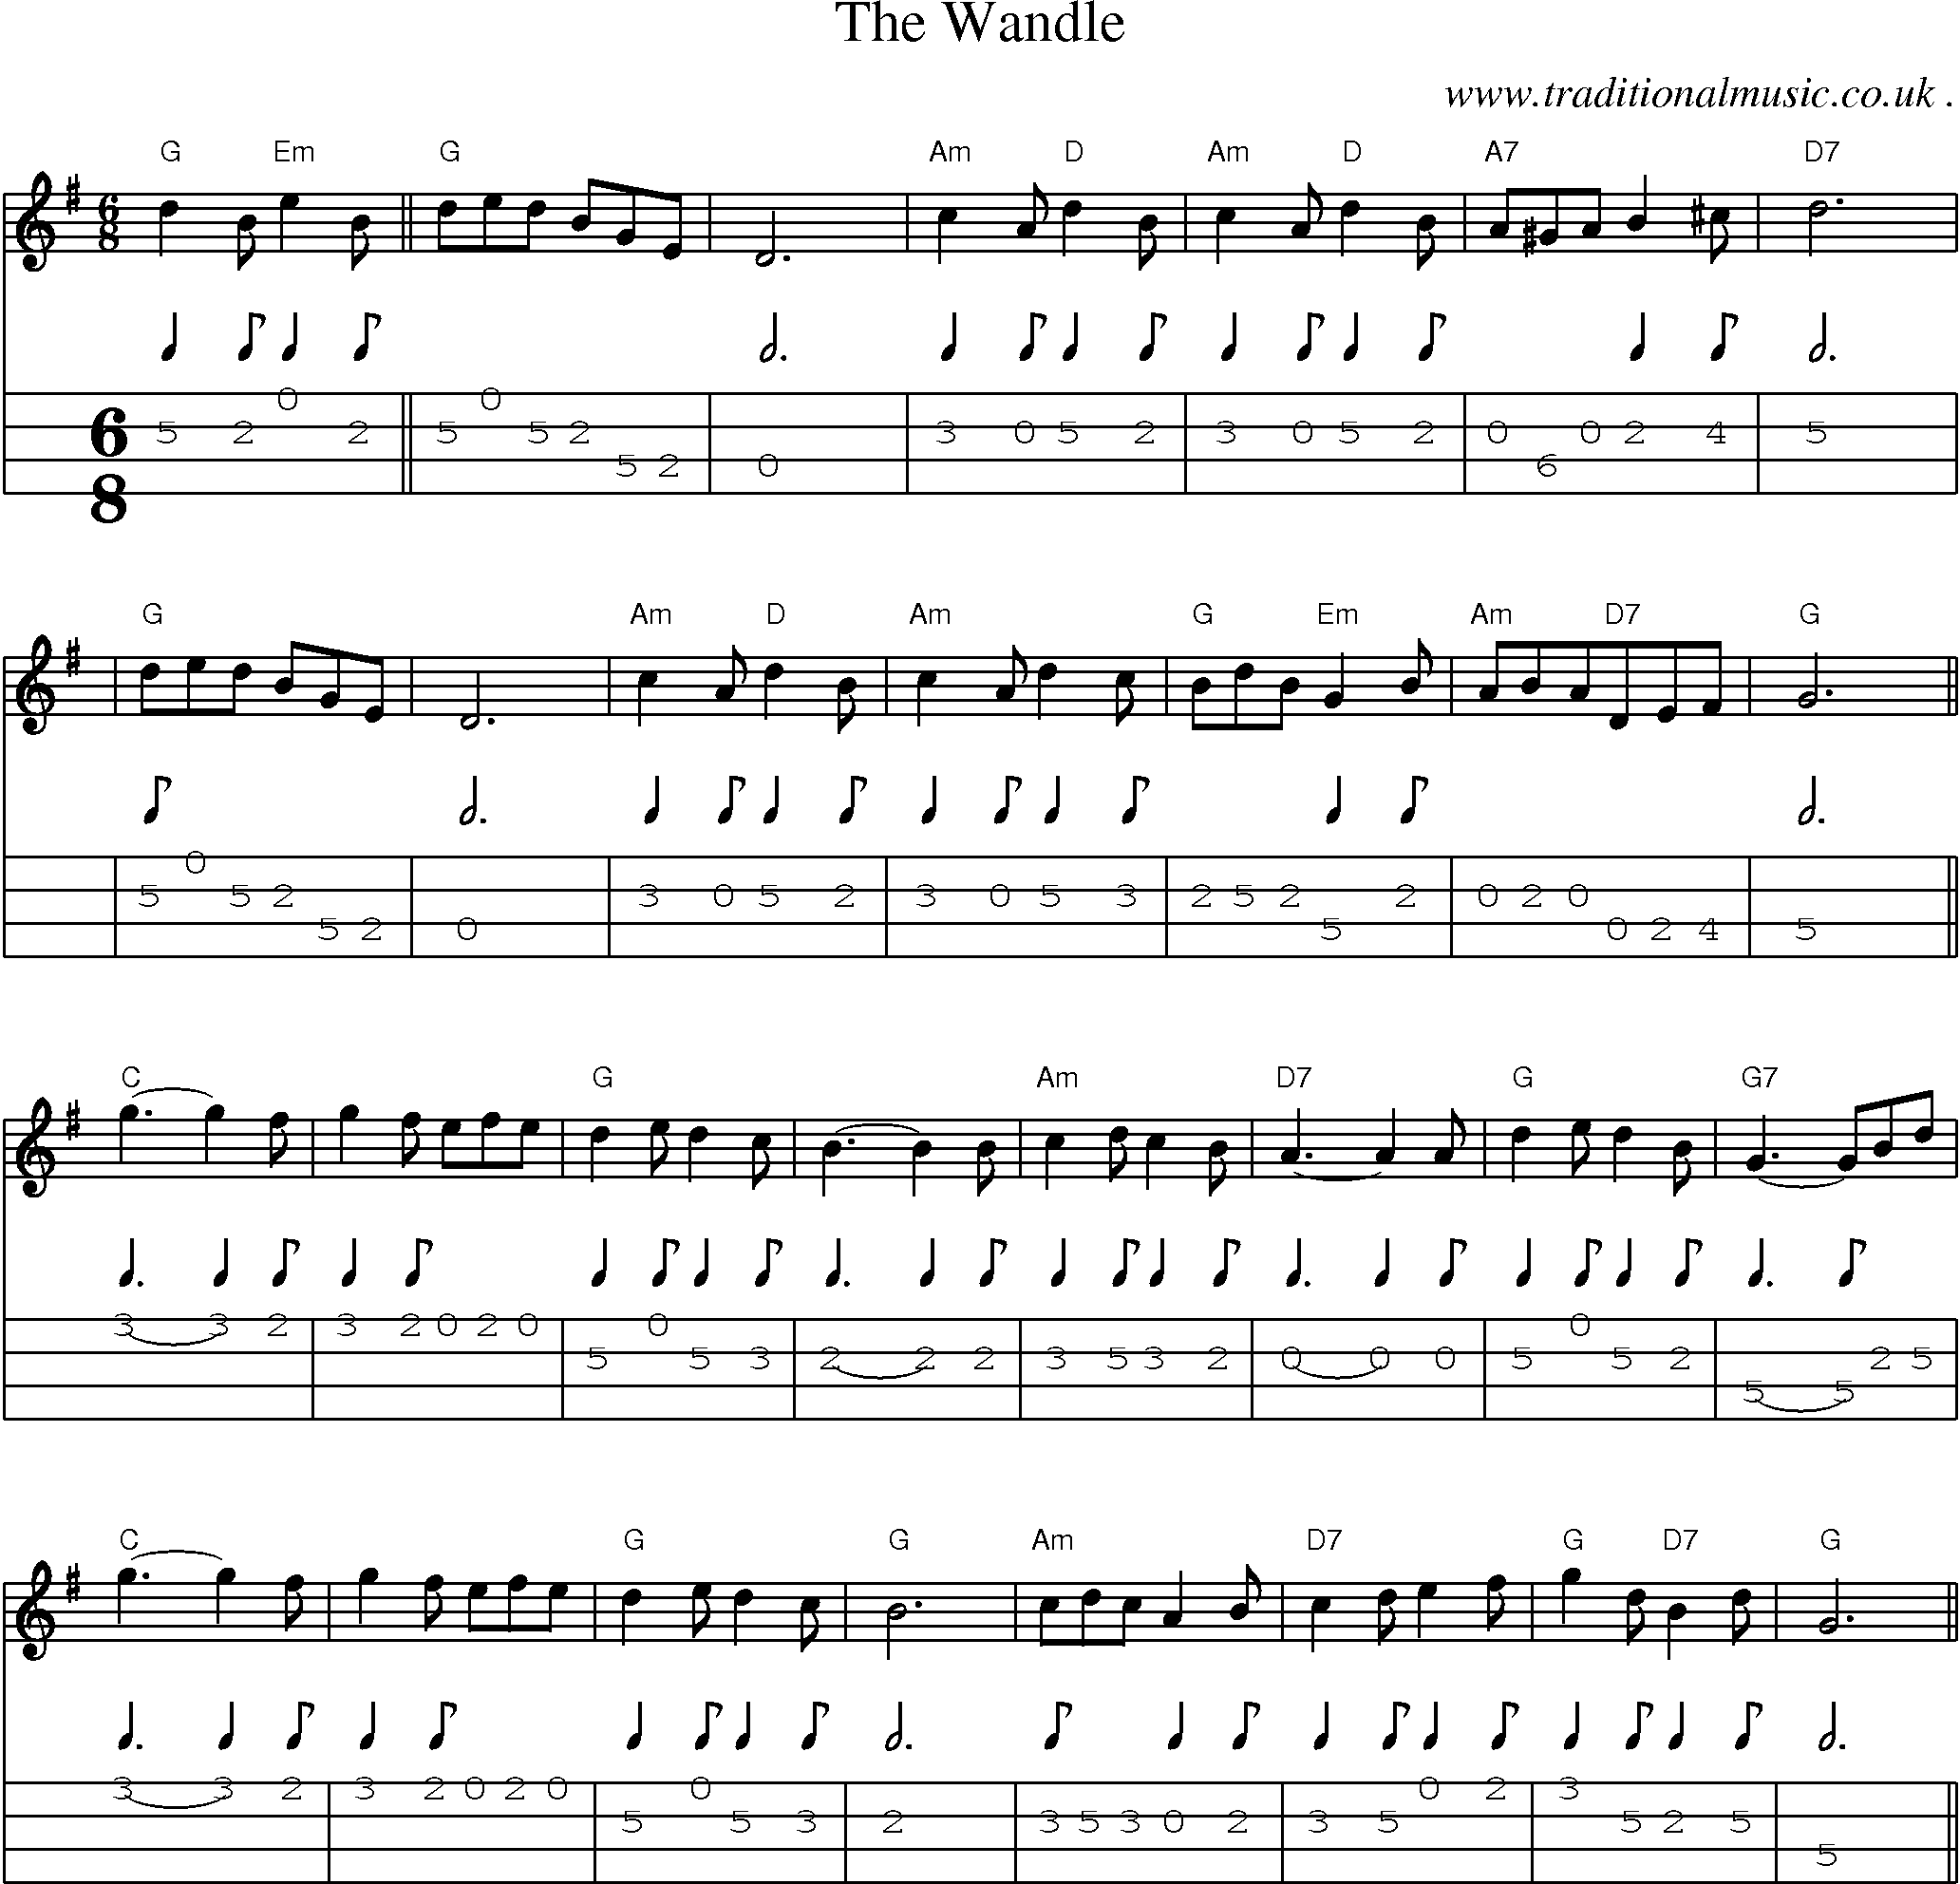 Sheet-Music and Mandolin Tabs for The Wandle